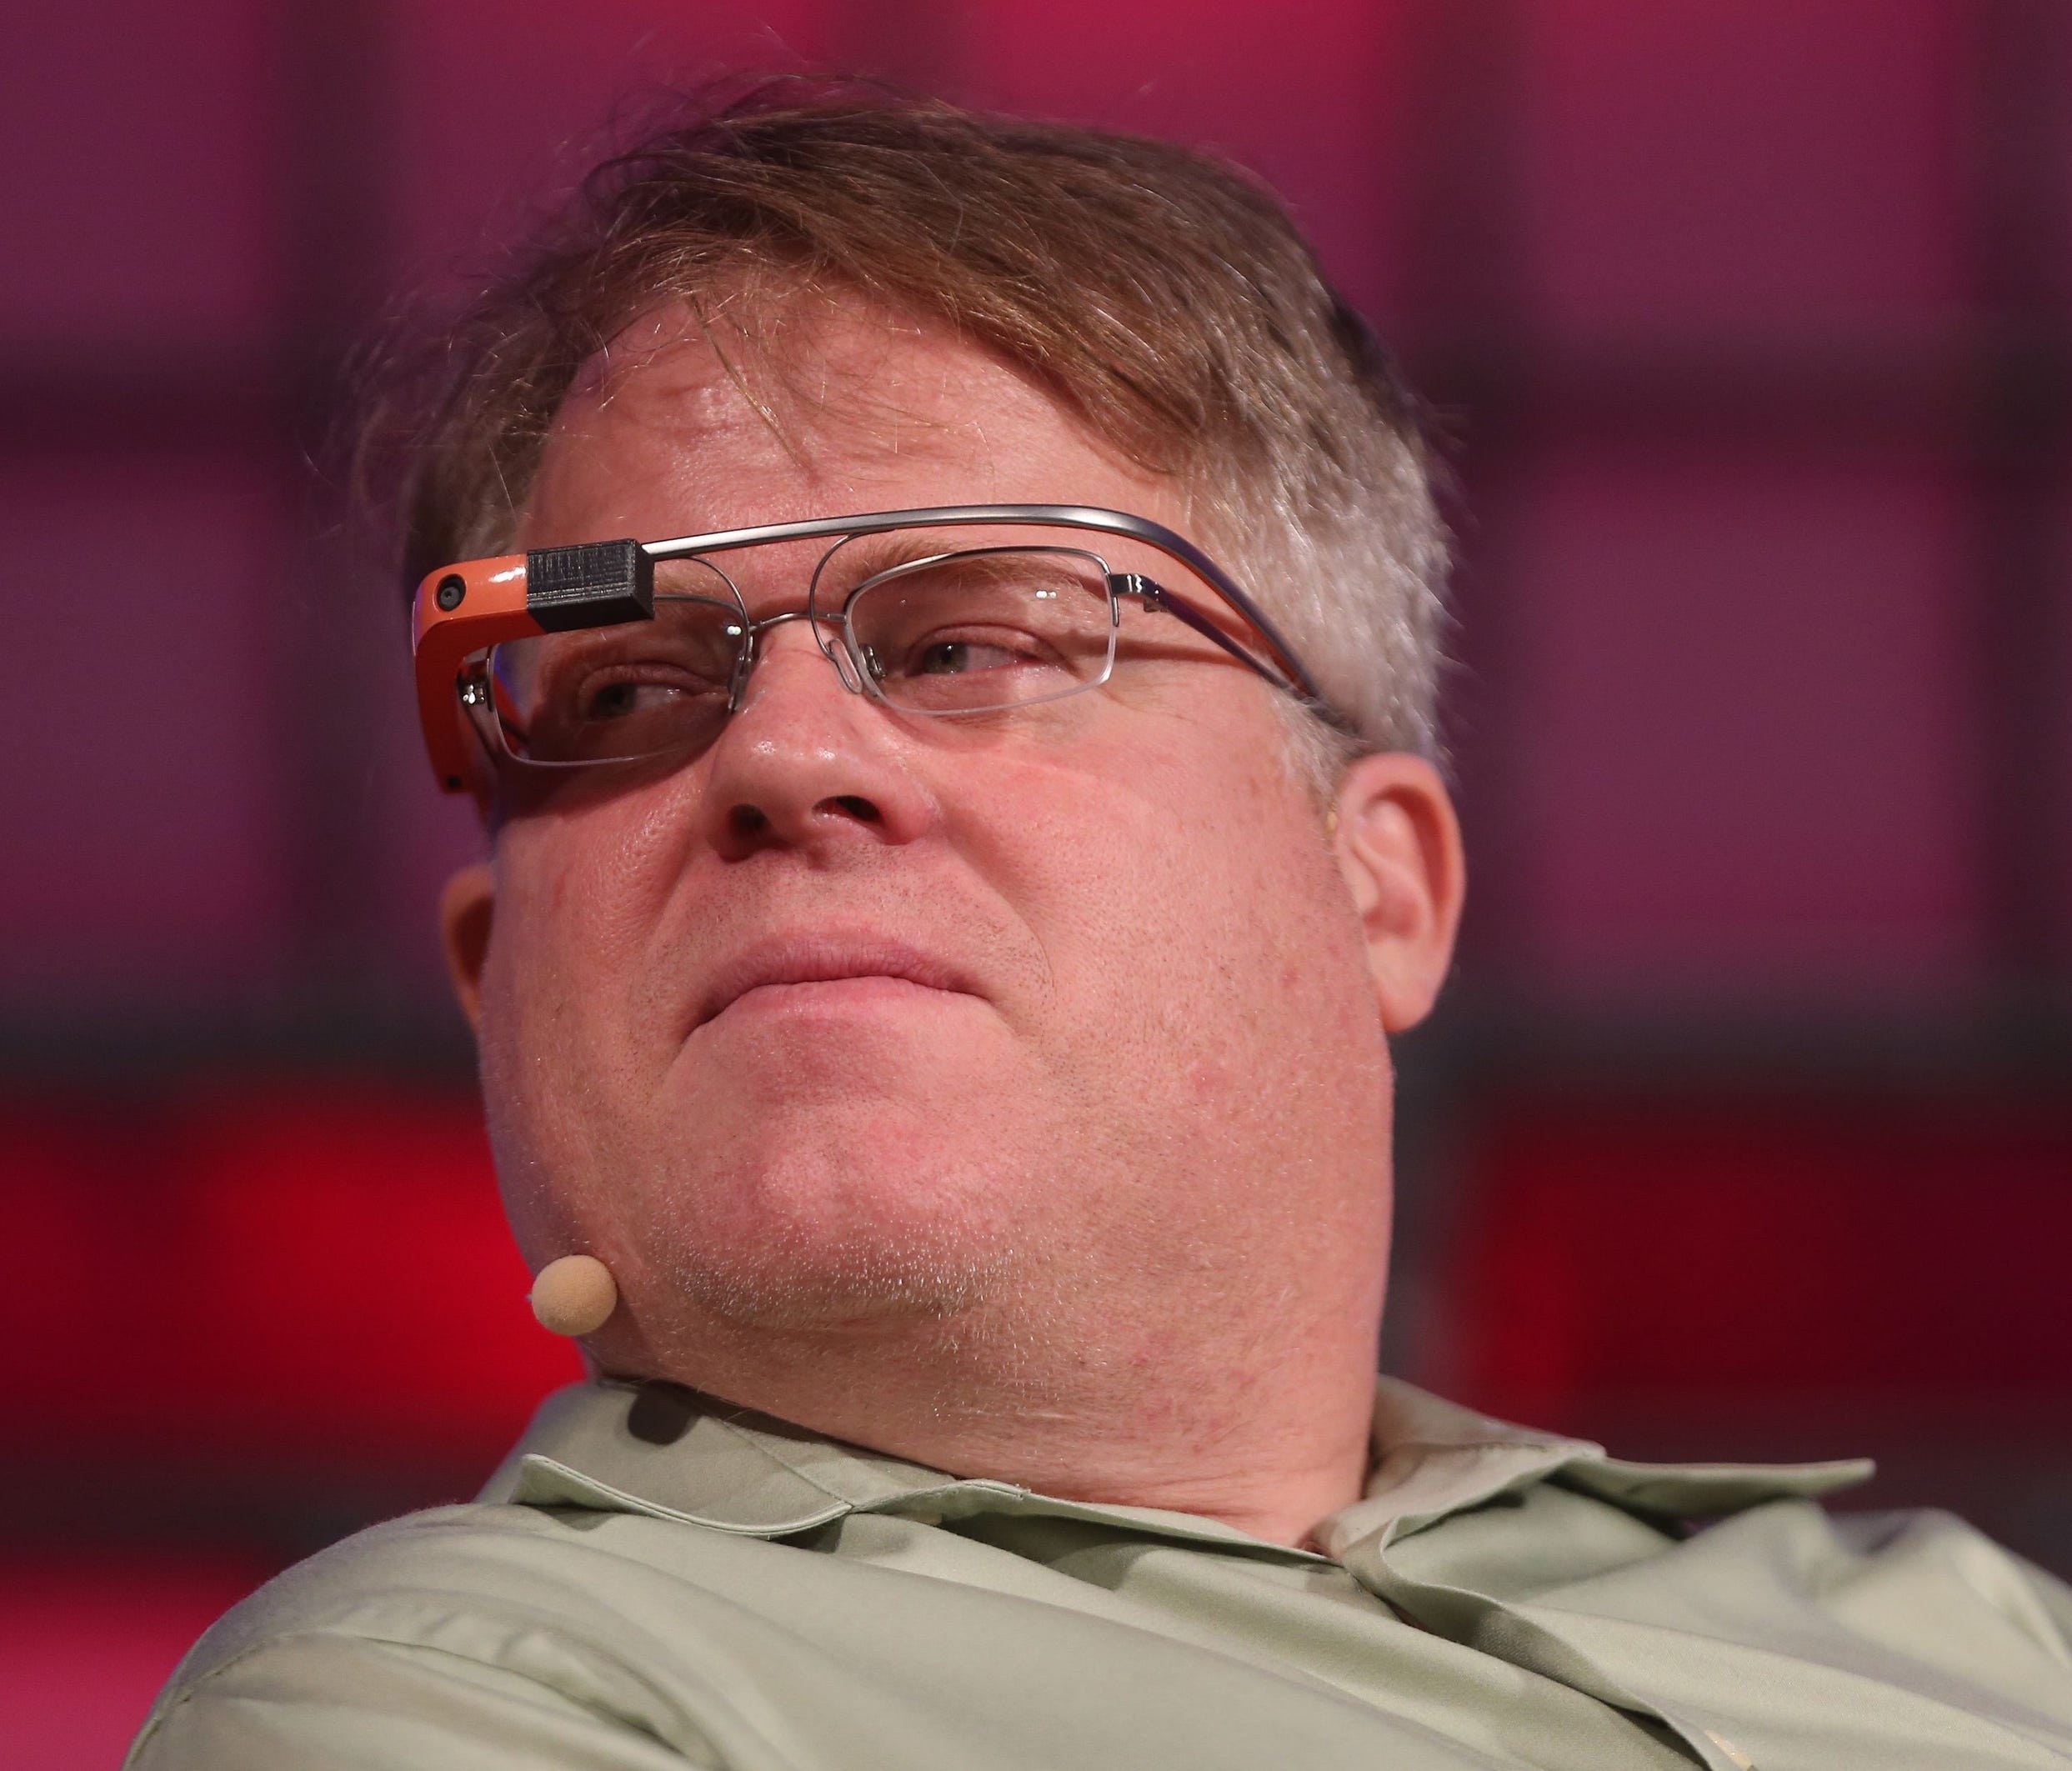 Tech blogger Robert Scoble wears Google Glass at the Dublin web summit. He resigned from Transformation Group after sexual harassment allegations.